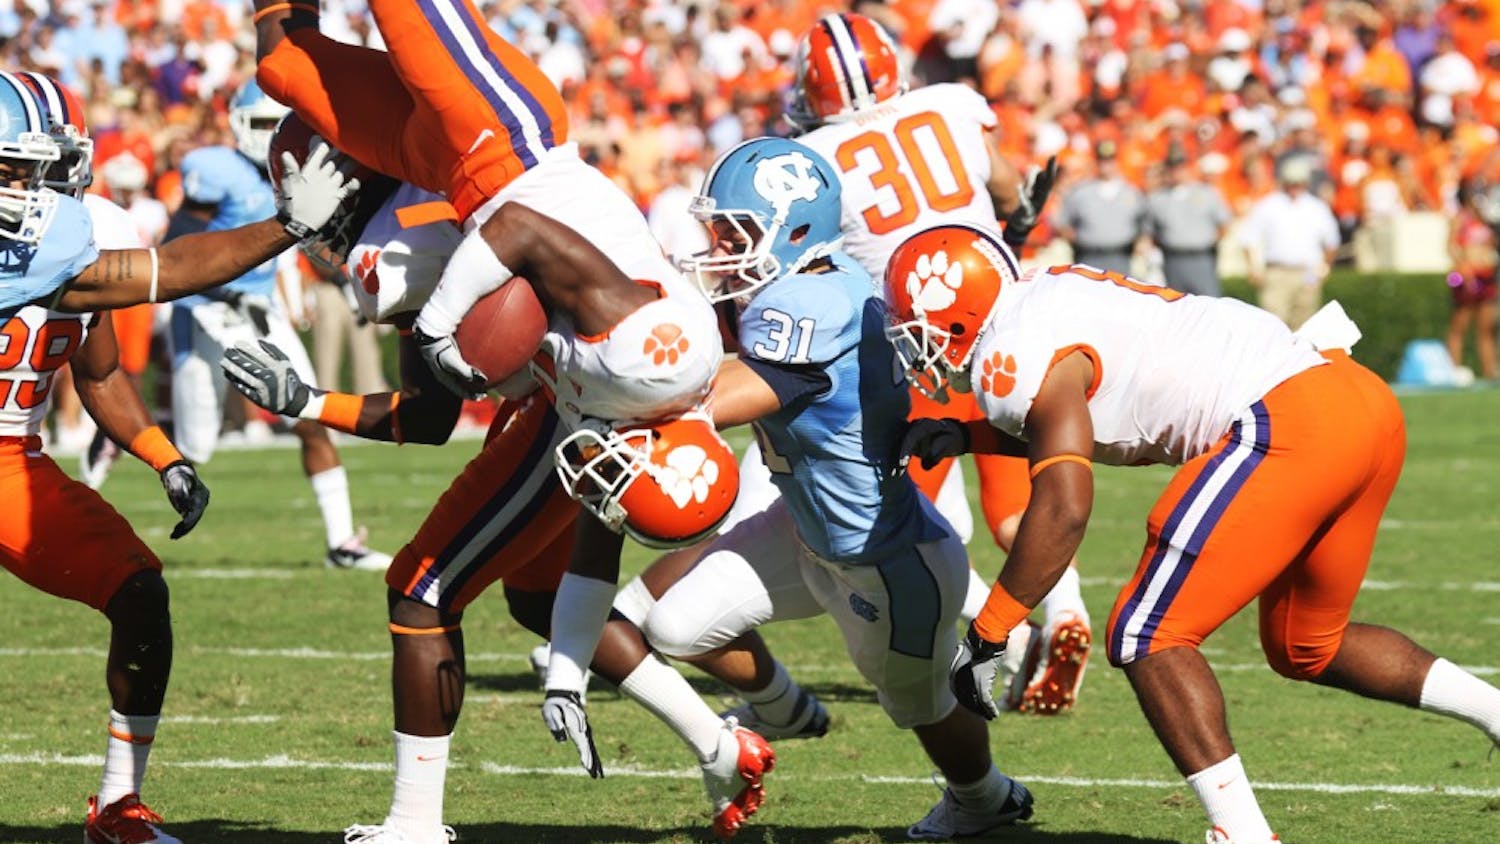 The Tar Heels flipped Clemson on its head, beating the Tigers for the first time since 2001. UNC held Clemson’s potent rushing attack to just 3.4 yards per rush.